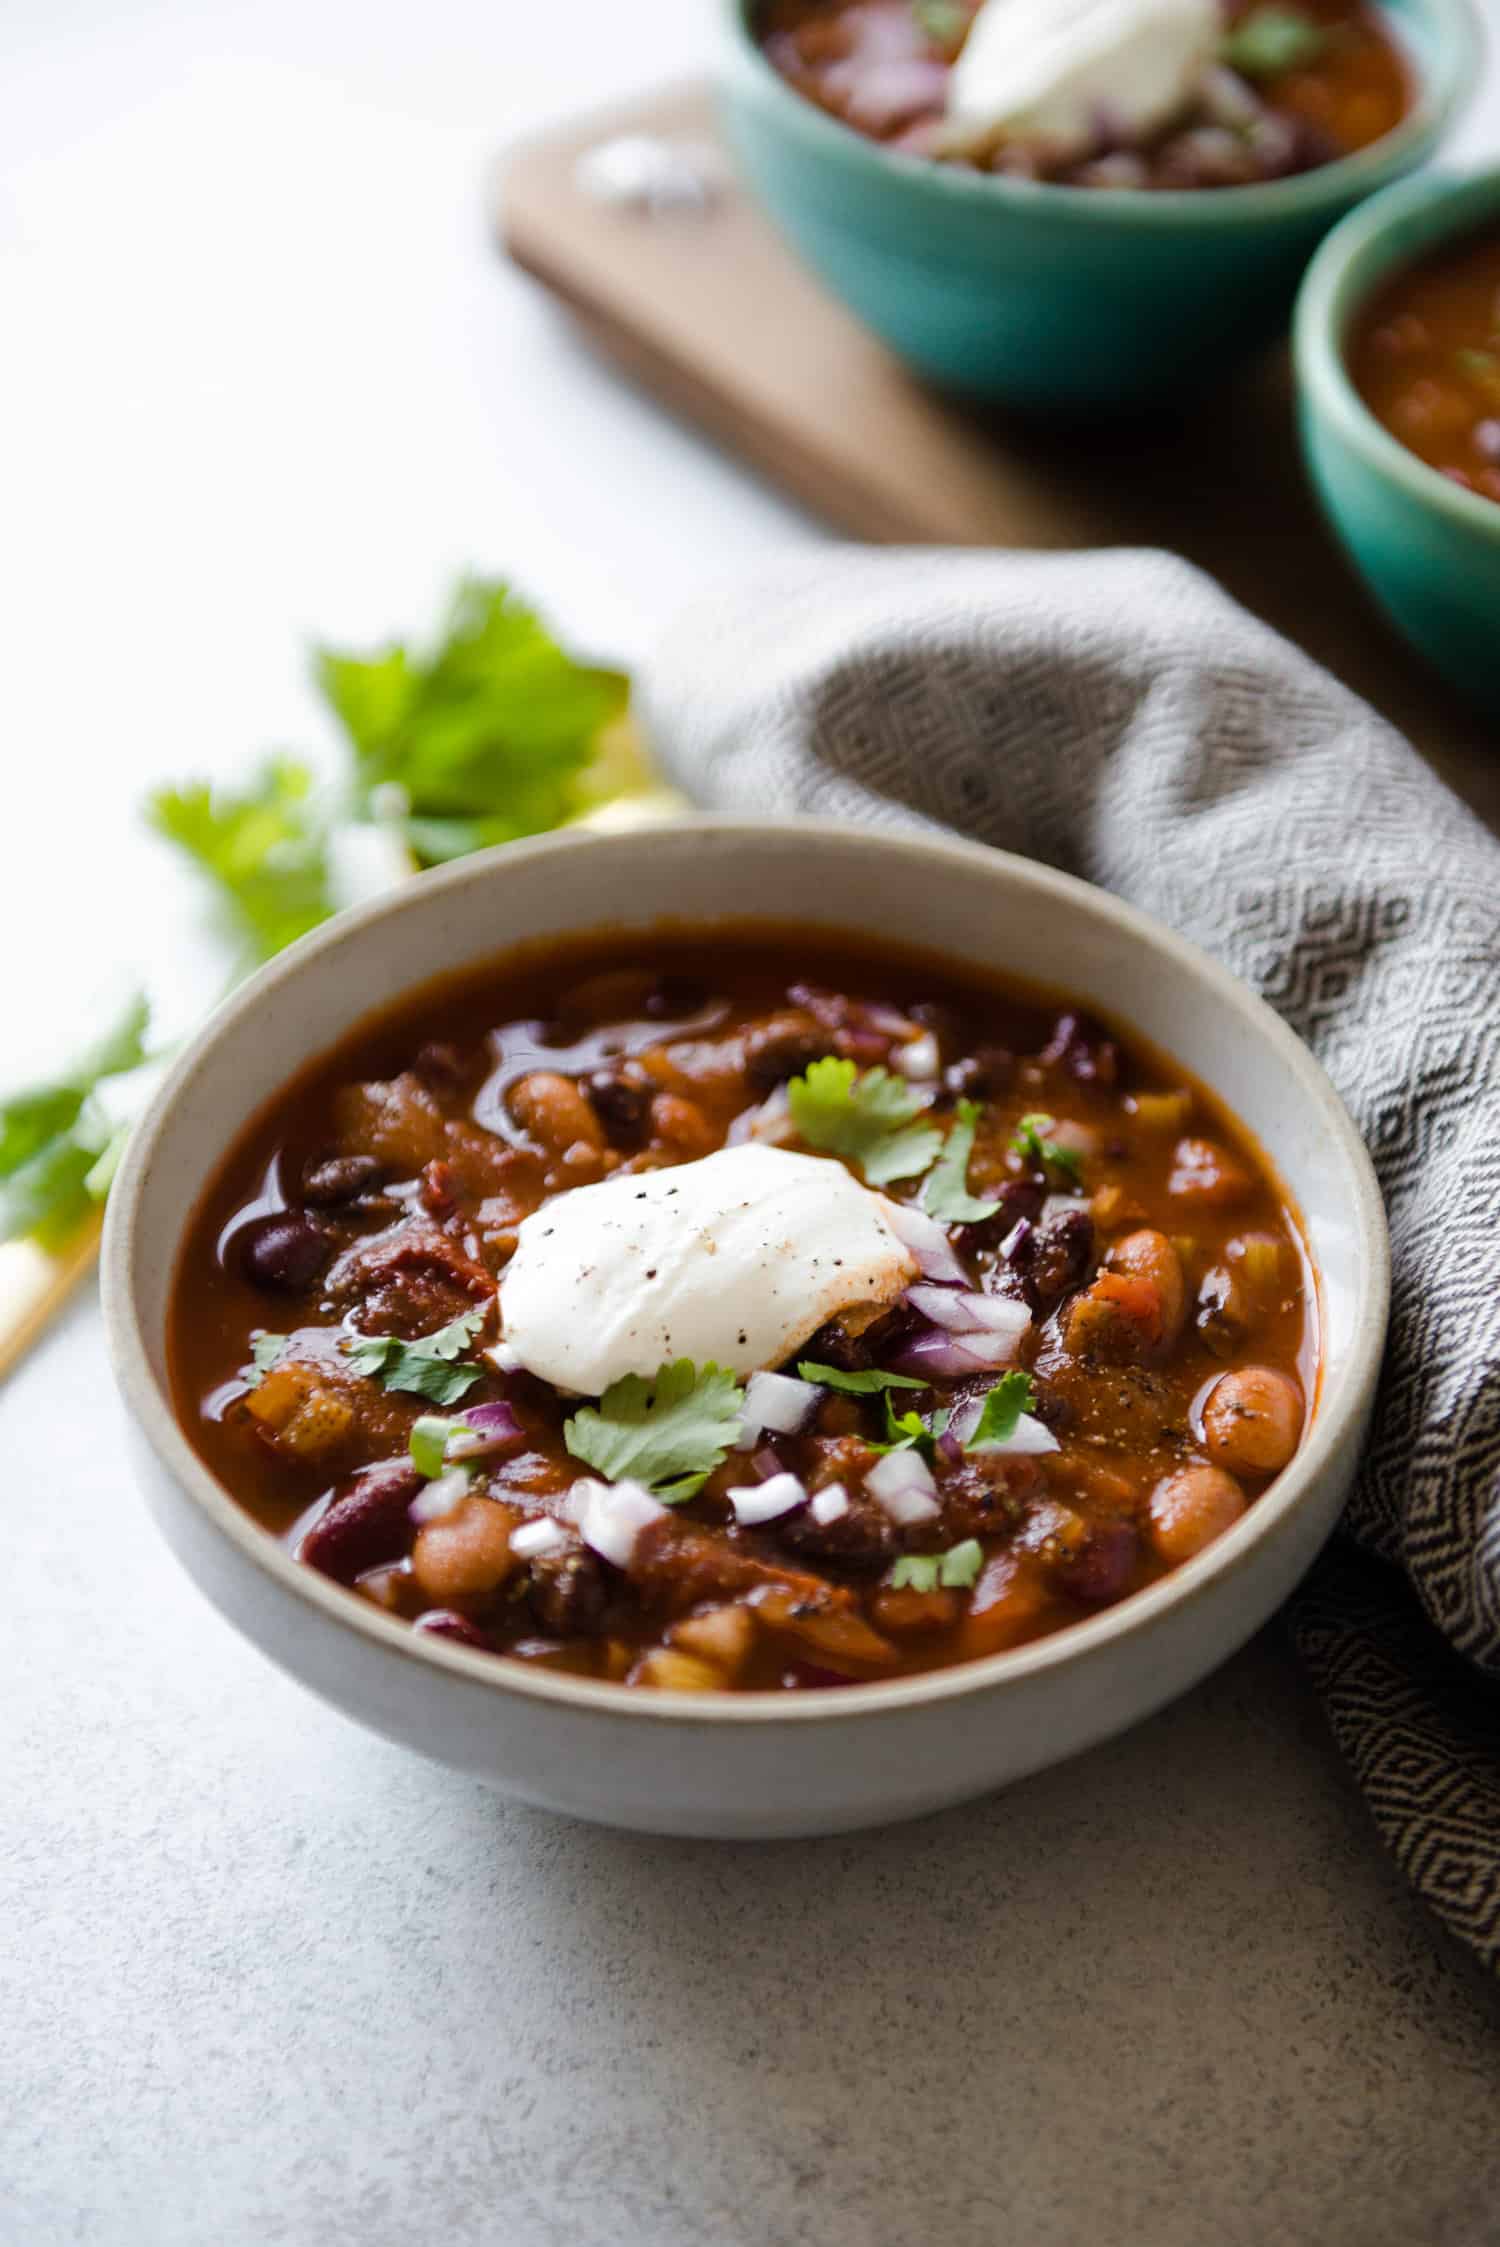 Chipotle Vegetarian Three Bean Chili - an easy and filling one-pot meal!